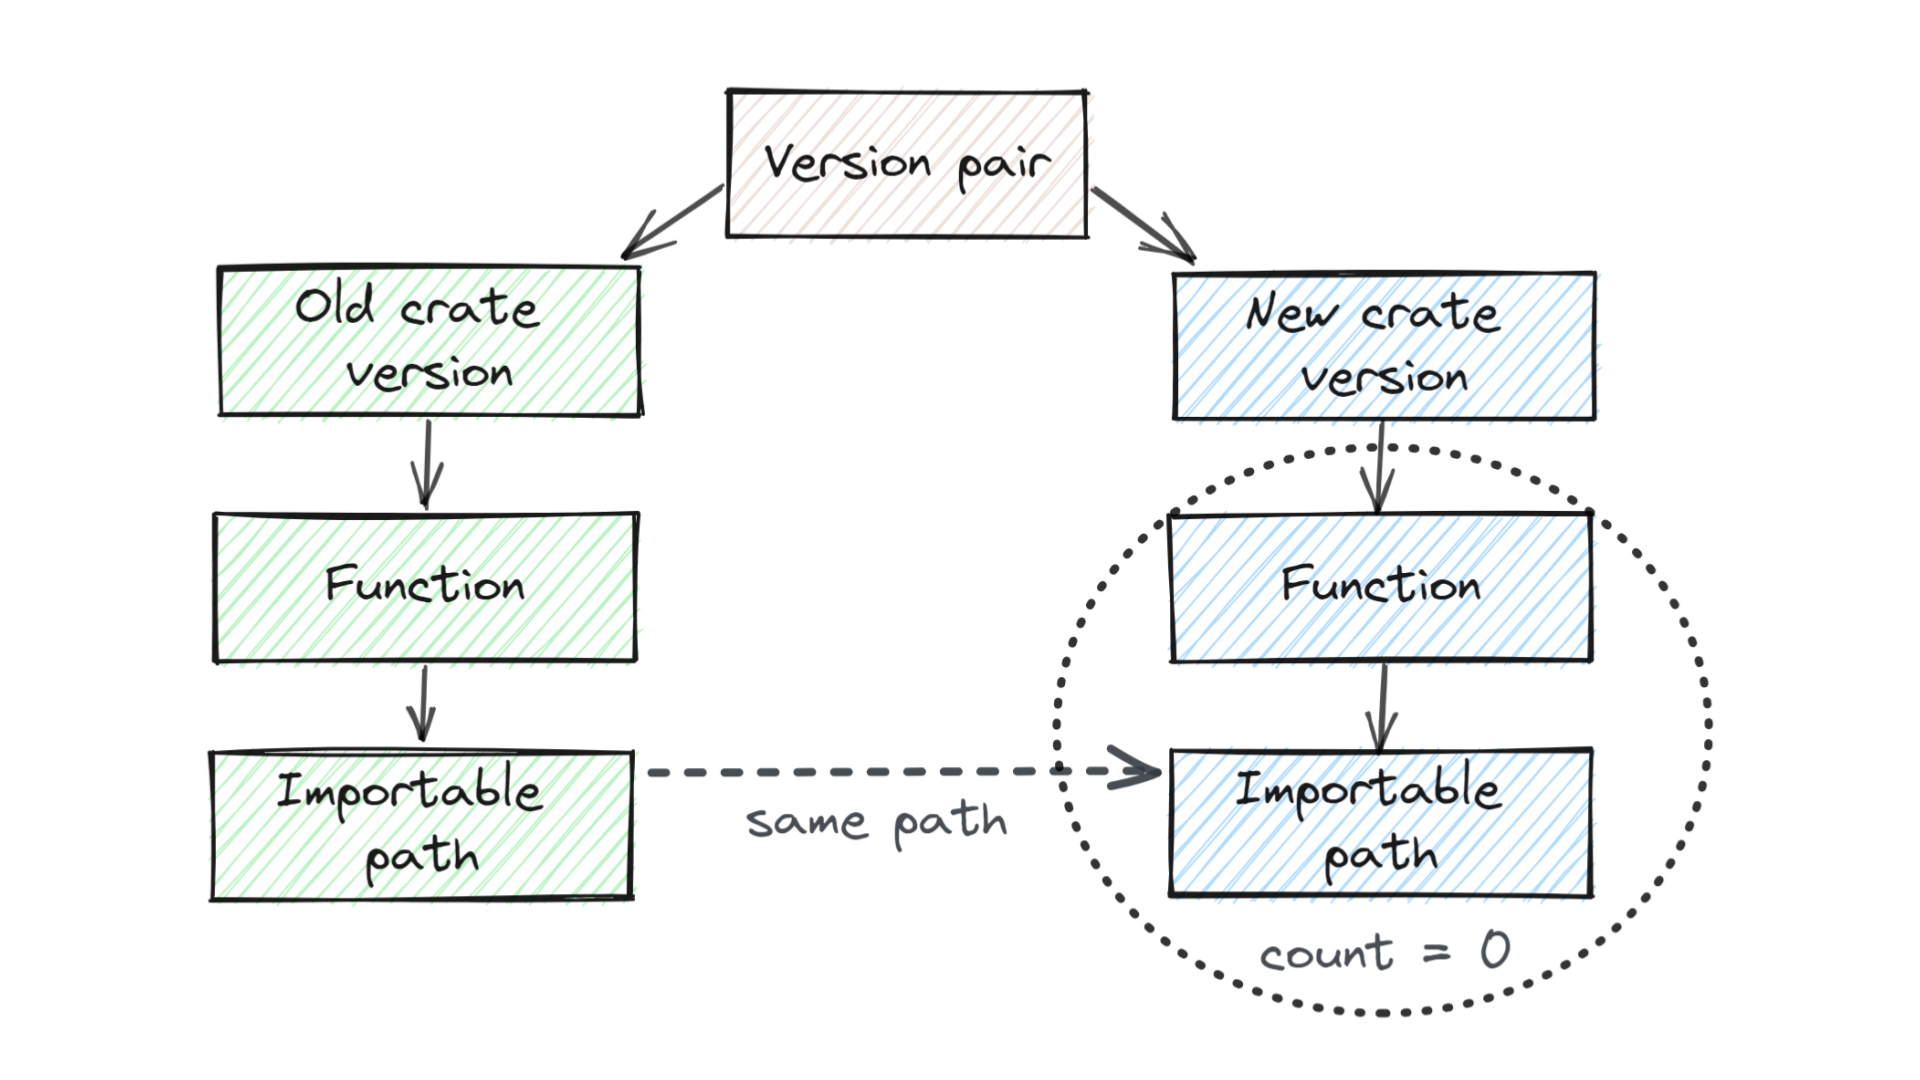 Diagram showing a visual representation of the aforementioned query. It shows a pair of crate versions. A function at a public importable path is singled out in the old crate version. In the new crate version, a function at the same importable path is also shown, and a circle around it is annotated with the condition `count = 0`, indicating that no such function in the new crate version exists.